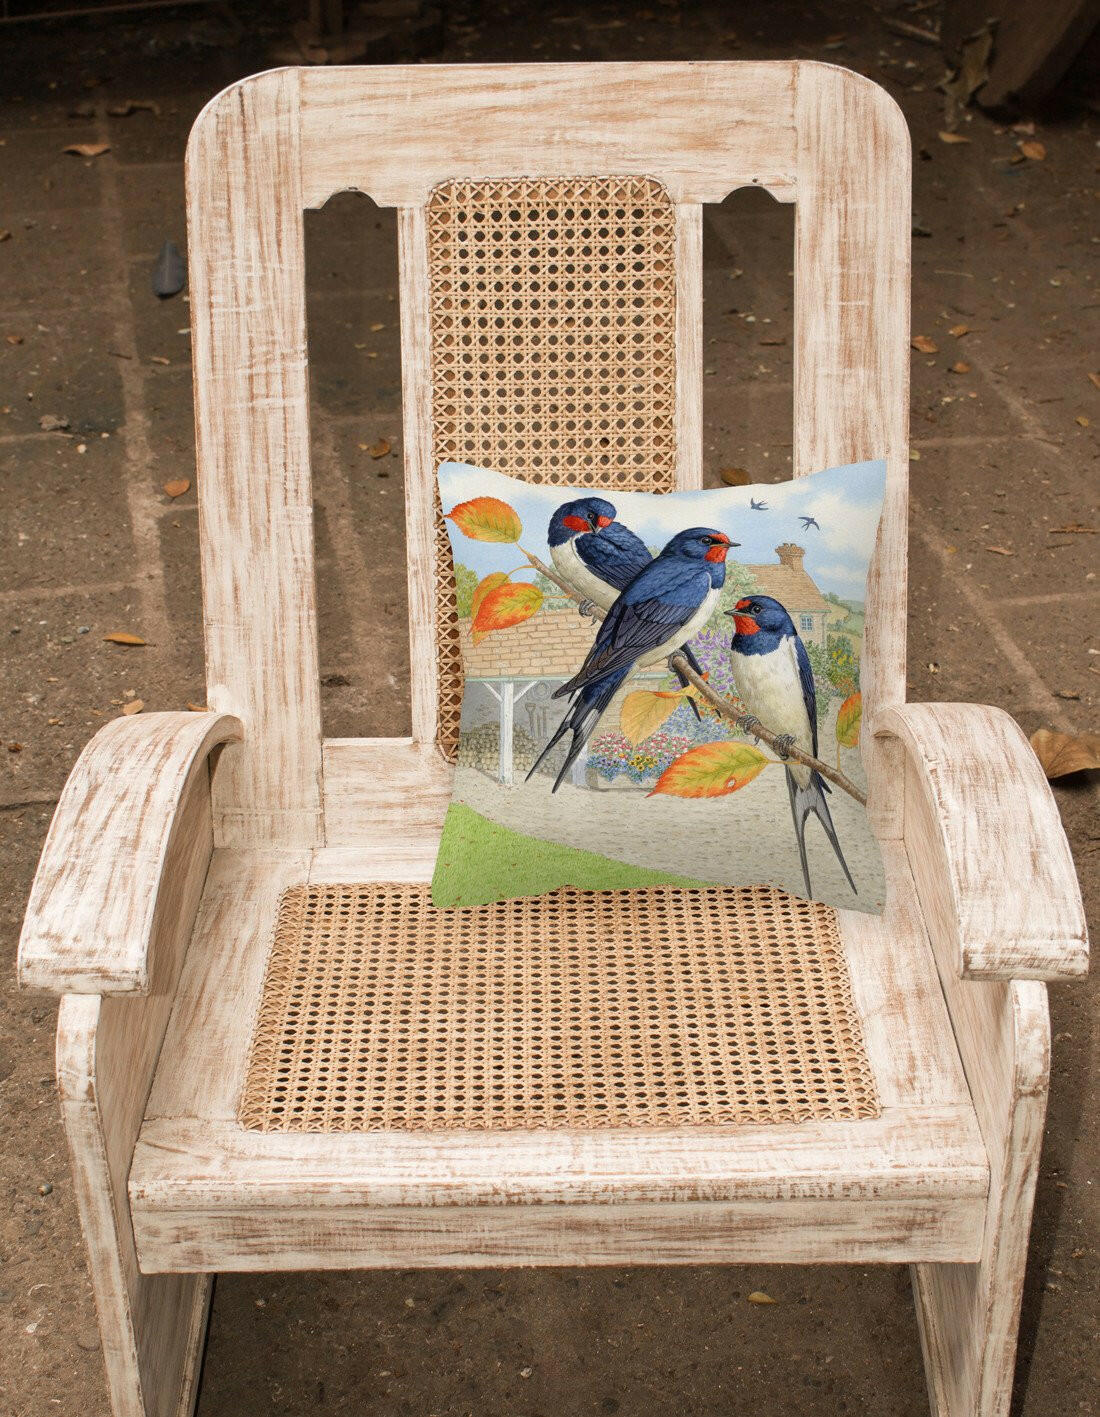 Swallows by Sarah Adams Canvas Decorative Pillow ASAD0694PW1414 - the-store.com